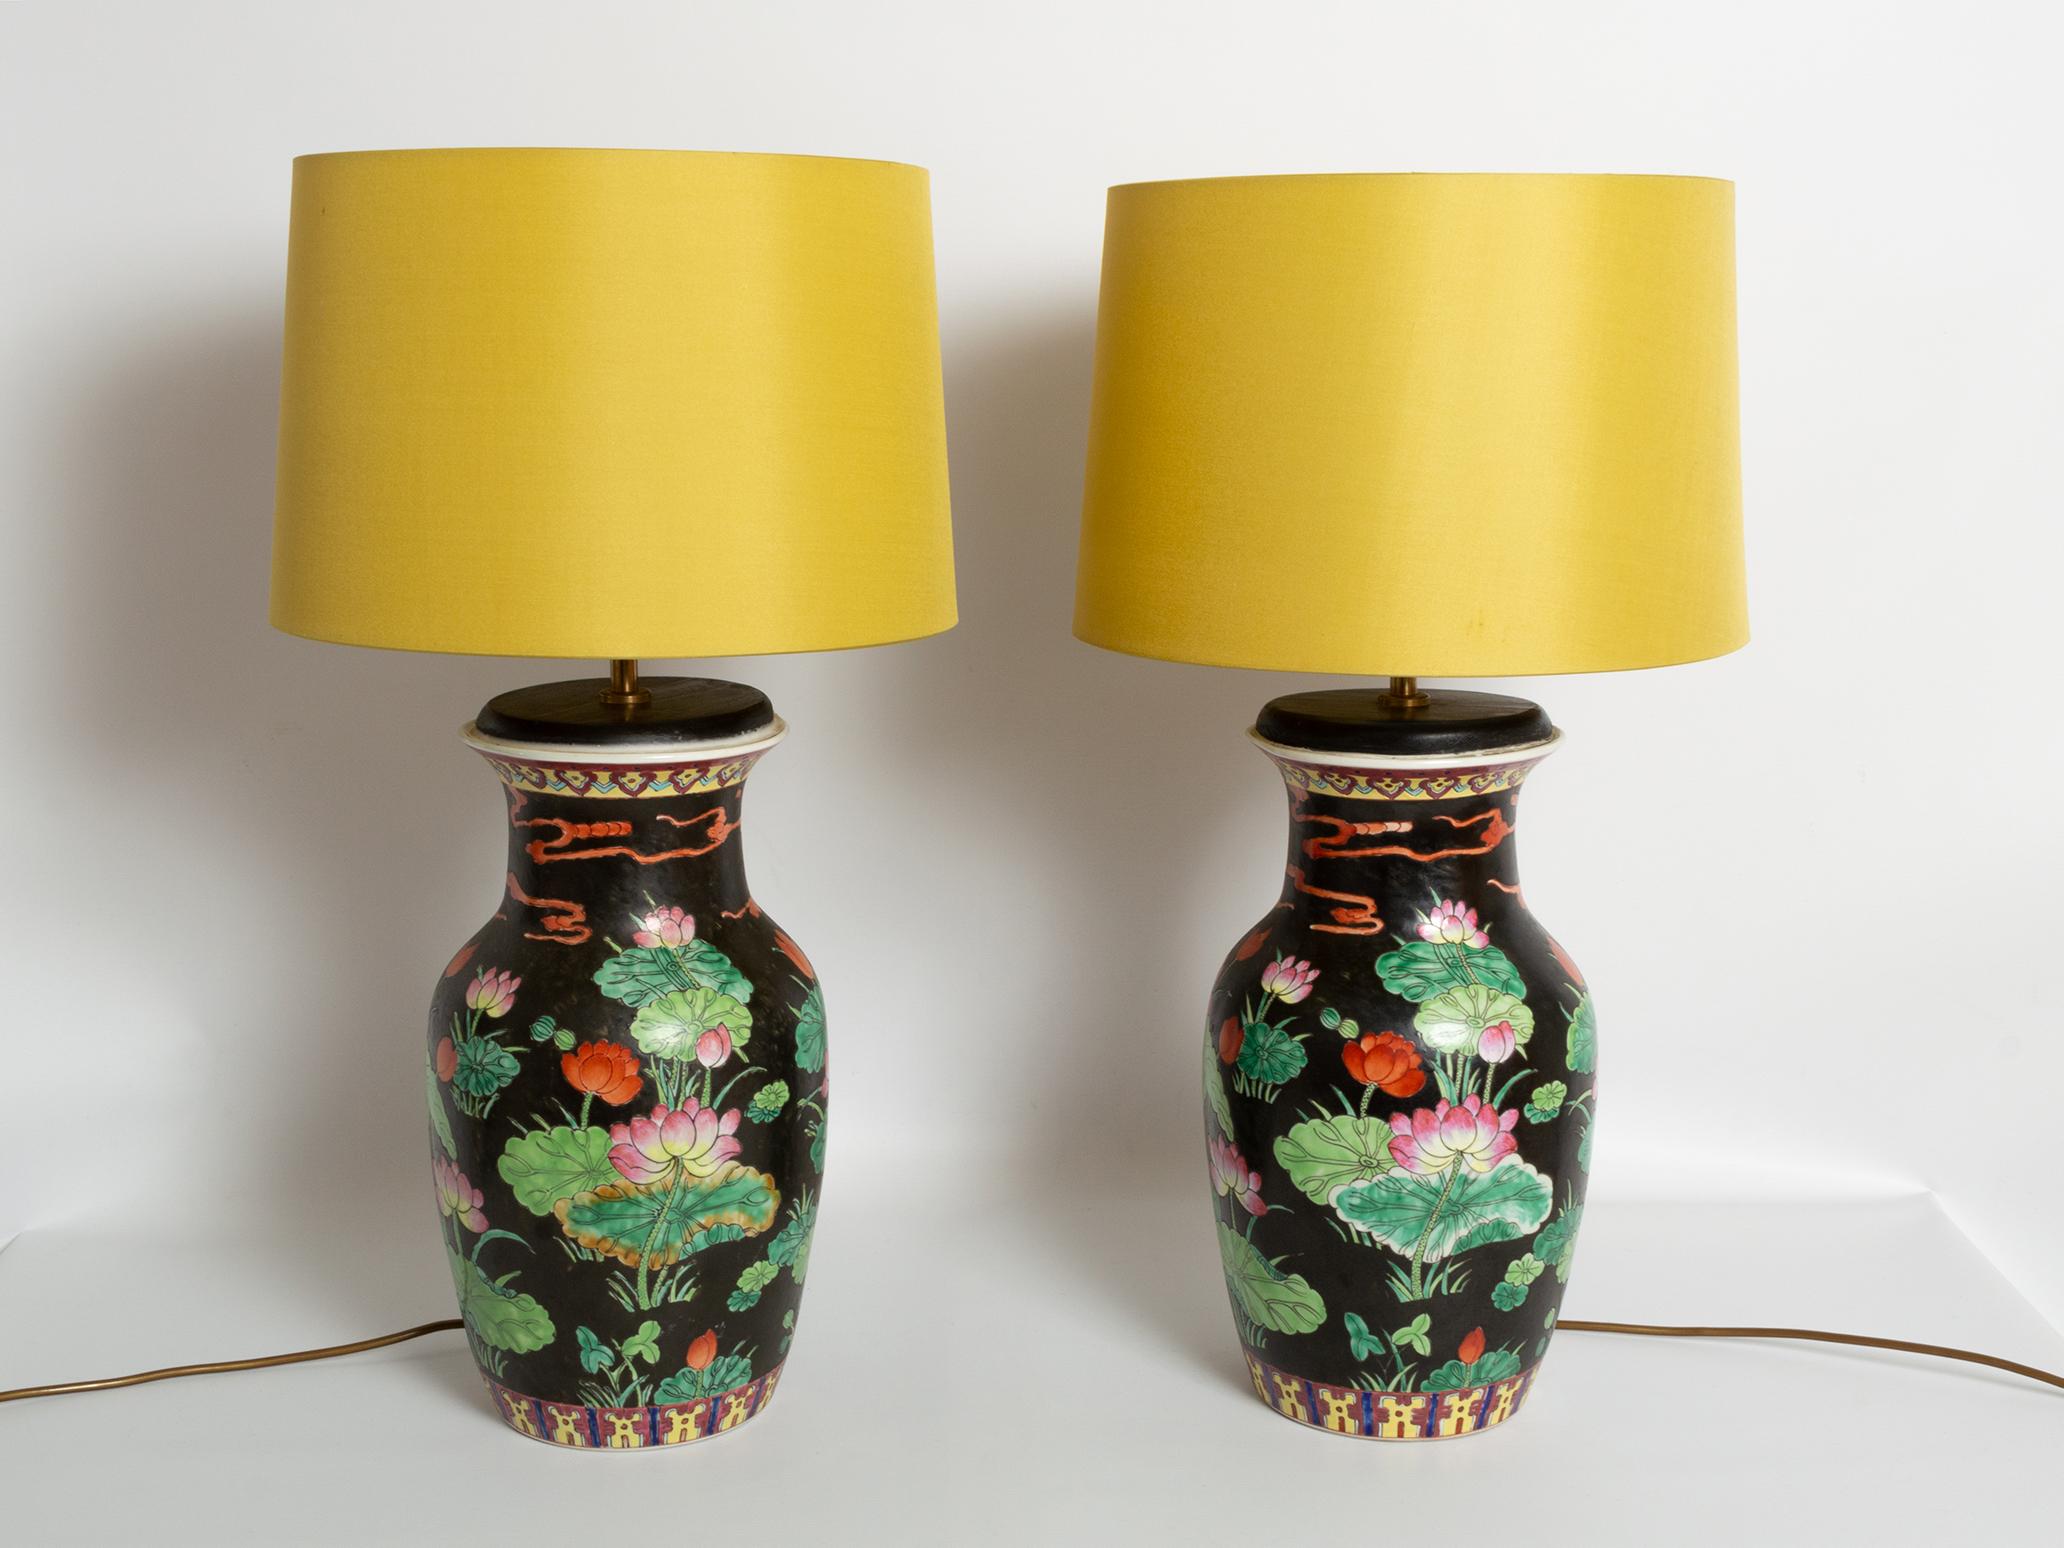 Antique Pair of 19th Century Famille Noire Chinese Vase Lamps, circa 1860 For Sale 3